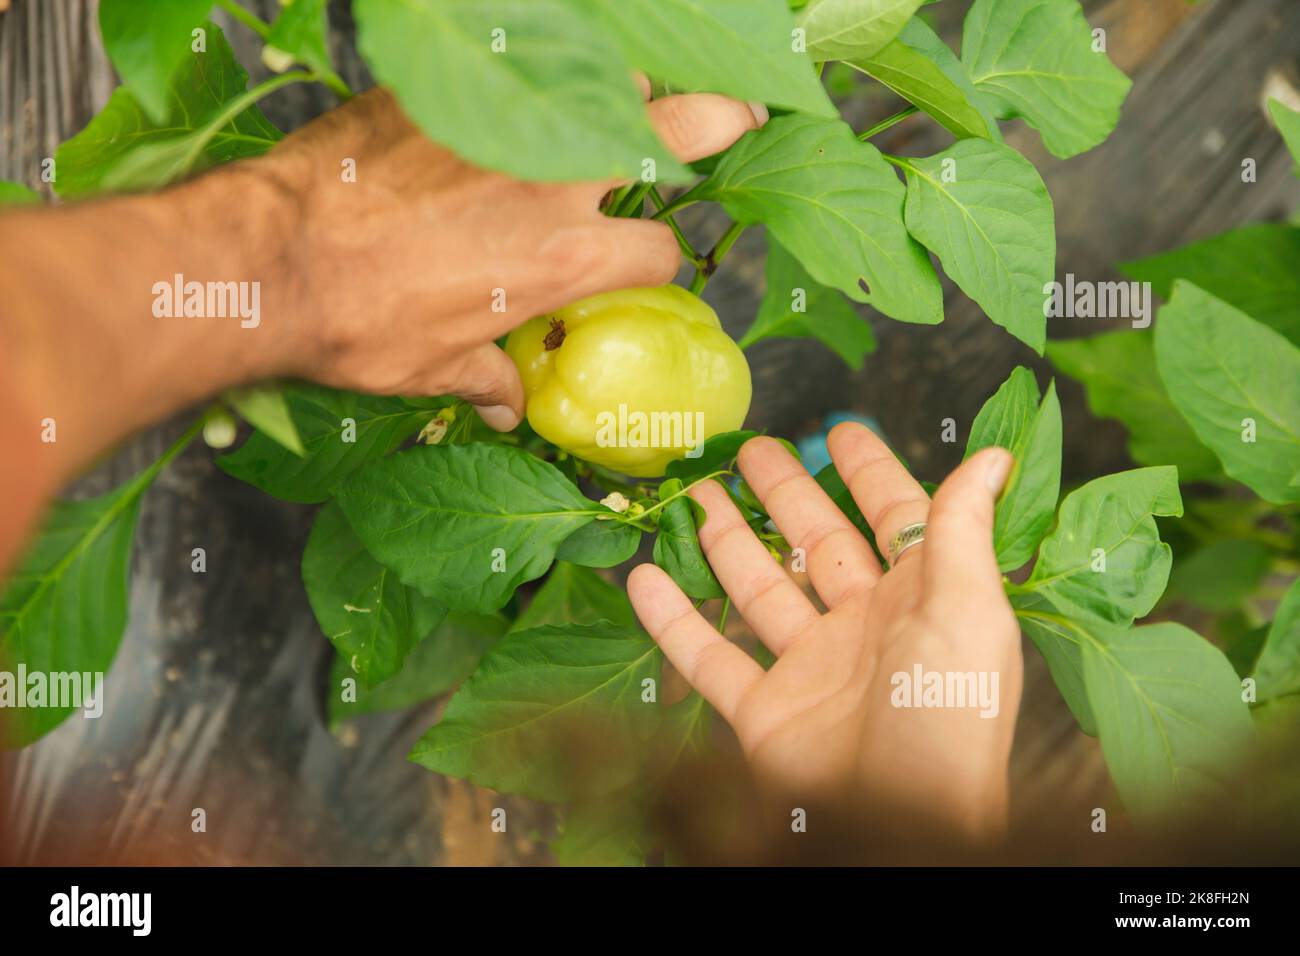 Hands of farmer showing fresh pepper amidst leaves Stock Photo